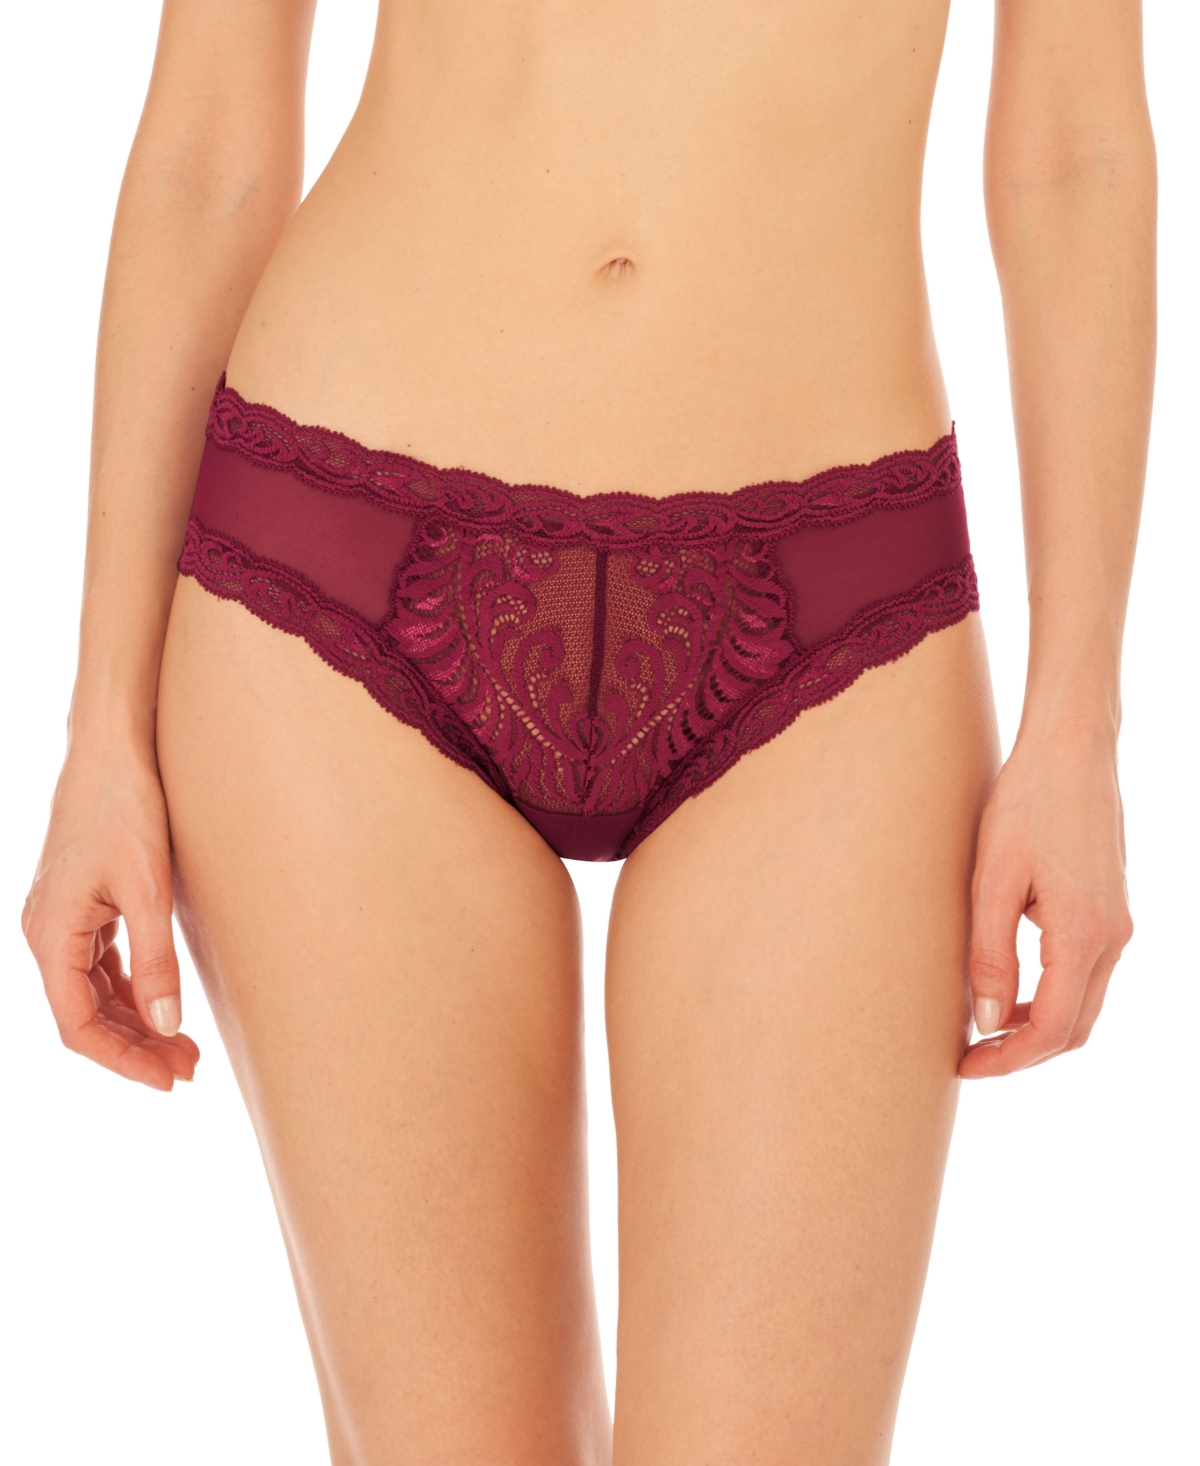 Natori Feathers Low-rise Sheer Hipster Underwear Lingerie 753023